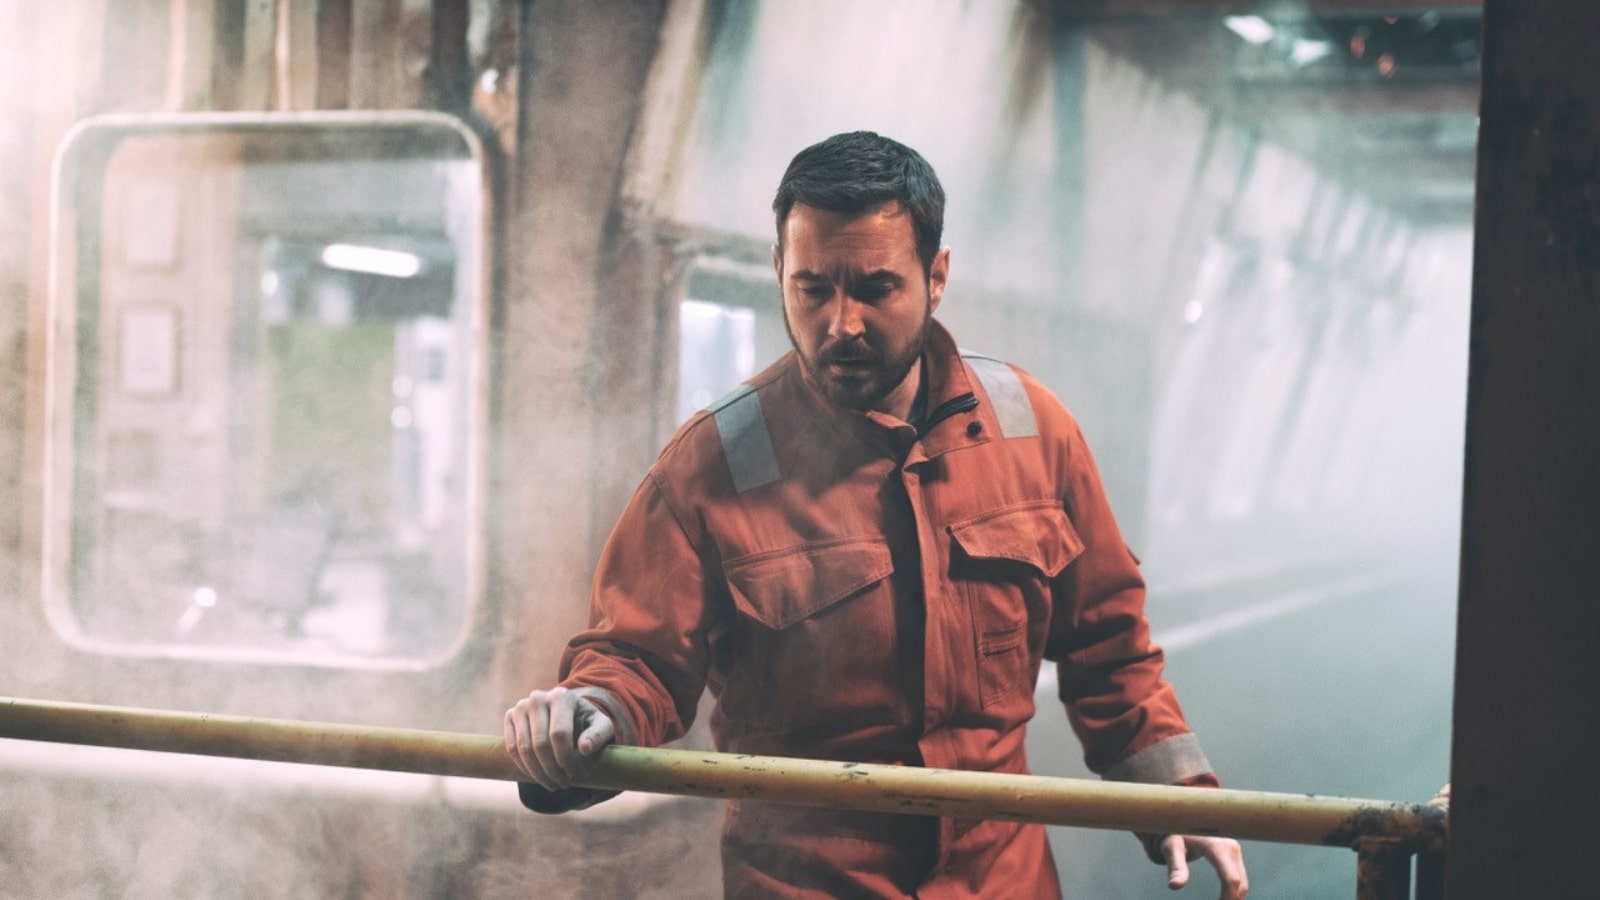 Mark Compston plays a rig worker - he stands in an orange boilersuit looking down over a railing